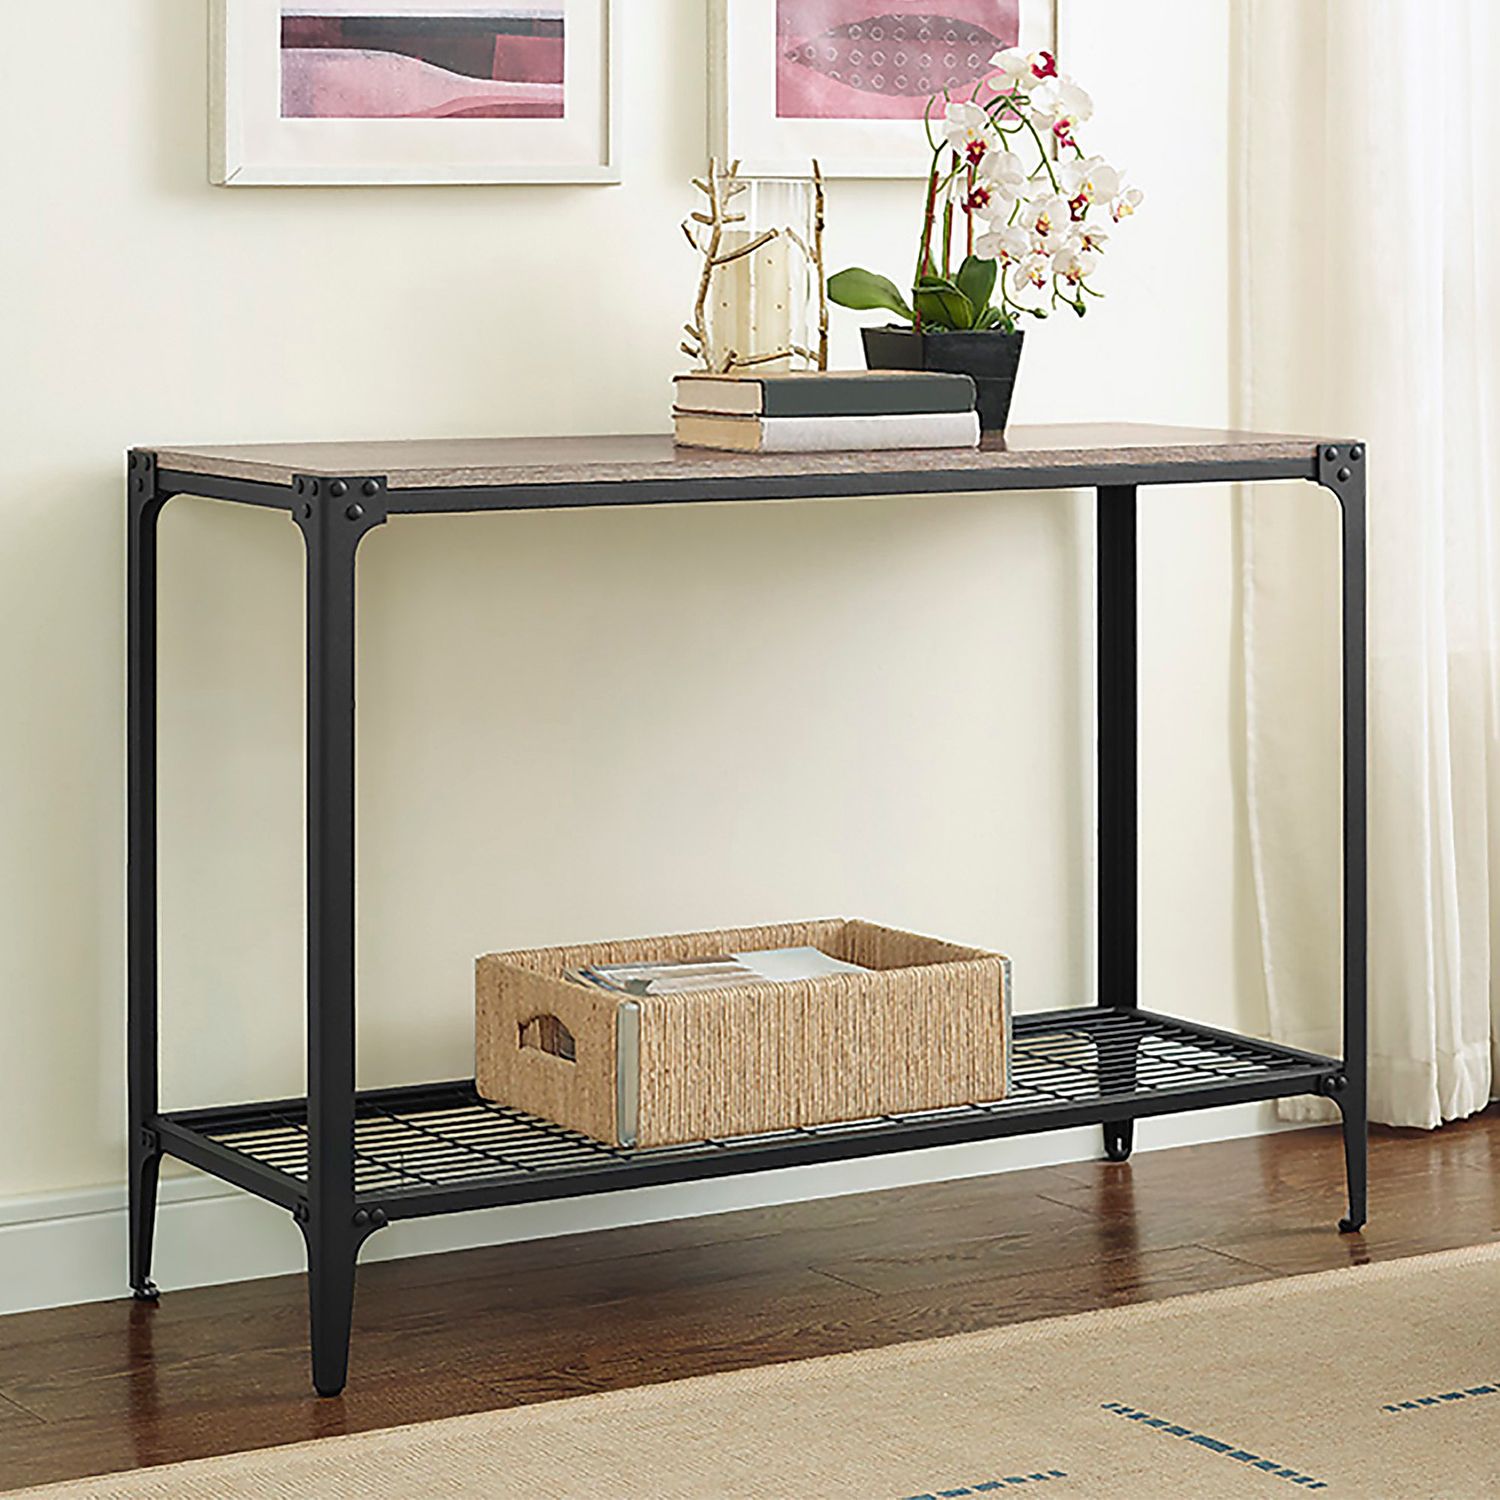 Angle Iron Rustic Console Table – Pier1 Imports With Rustic Oak And Black Console Tables (View 15 of 20)